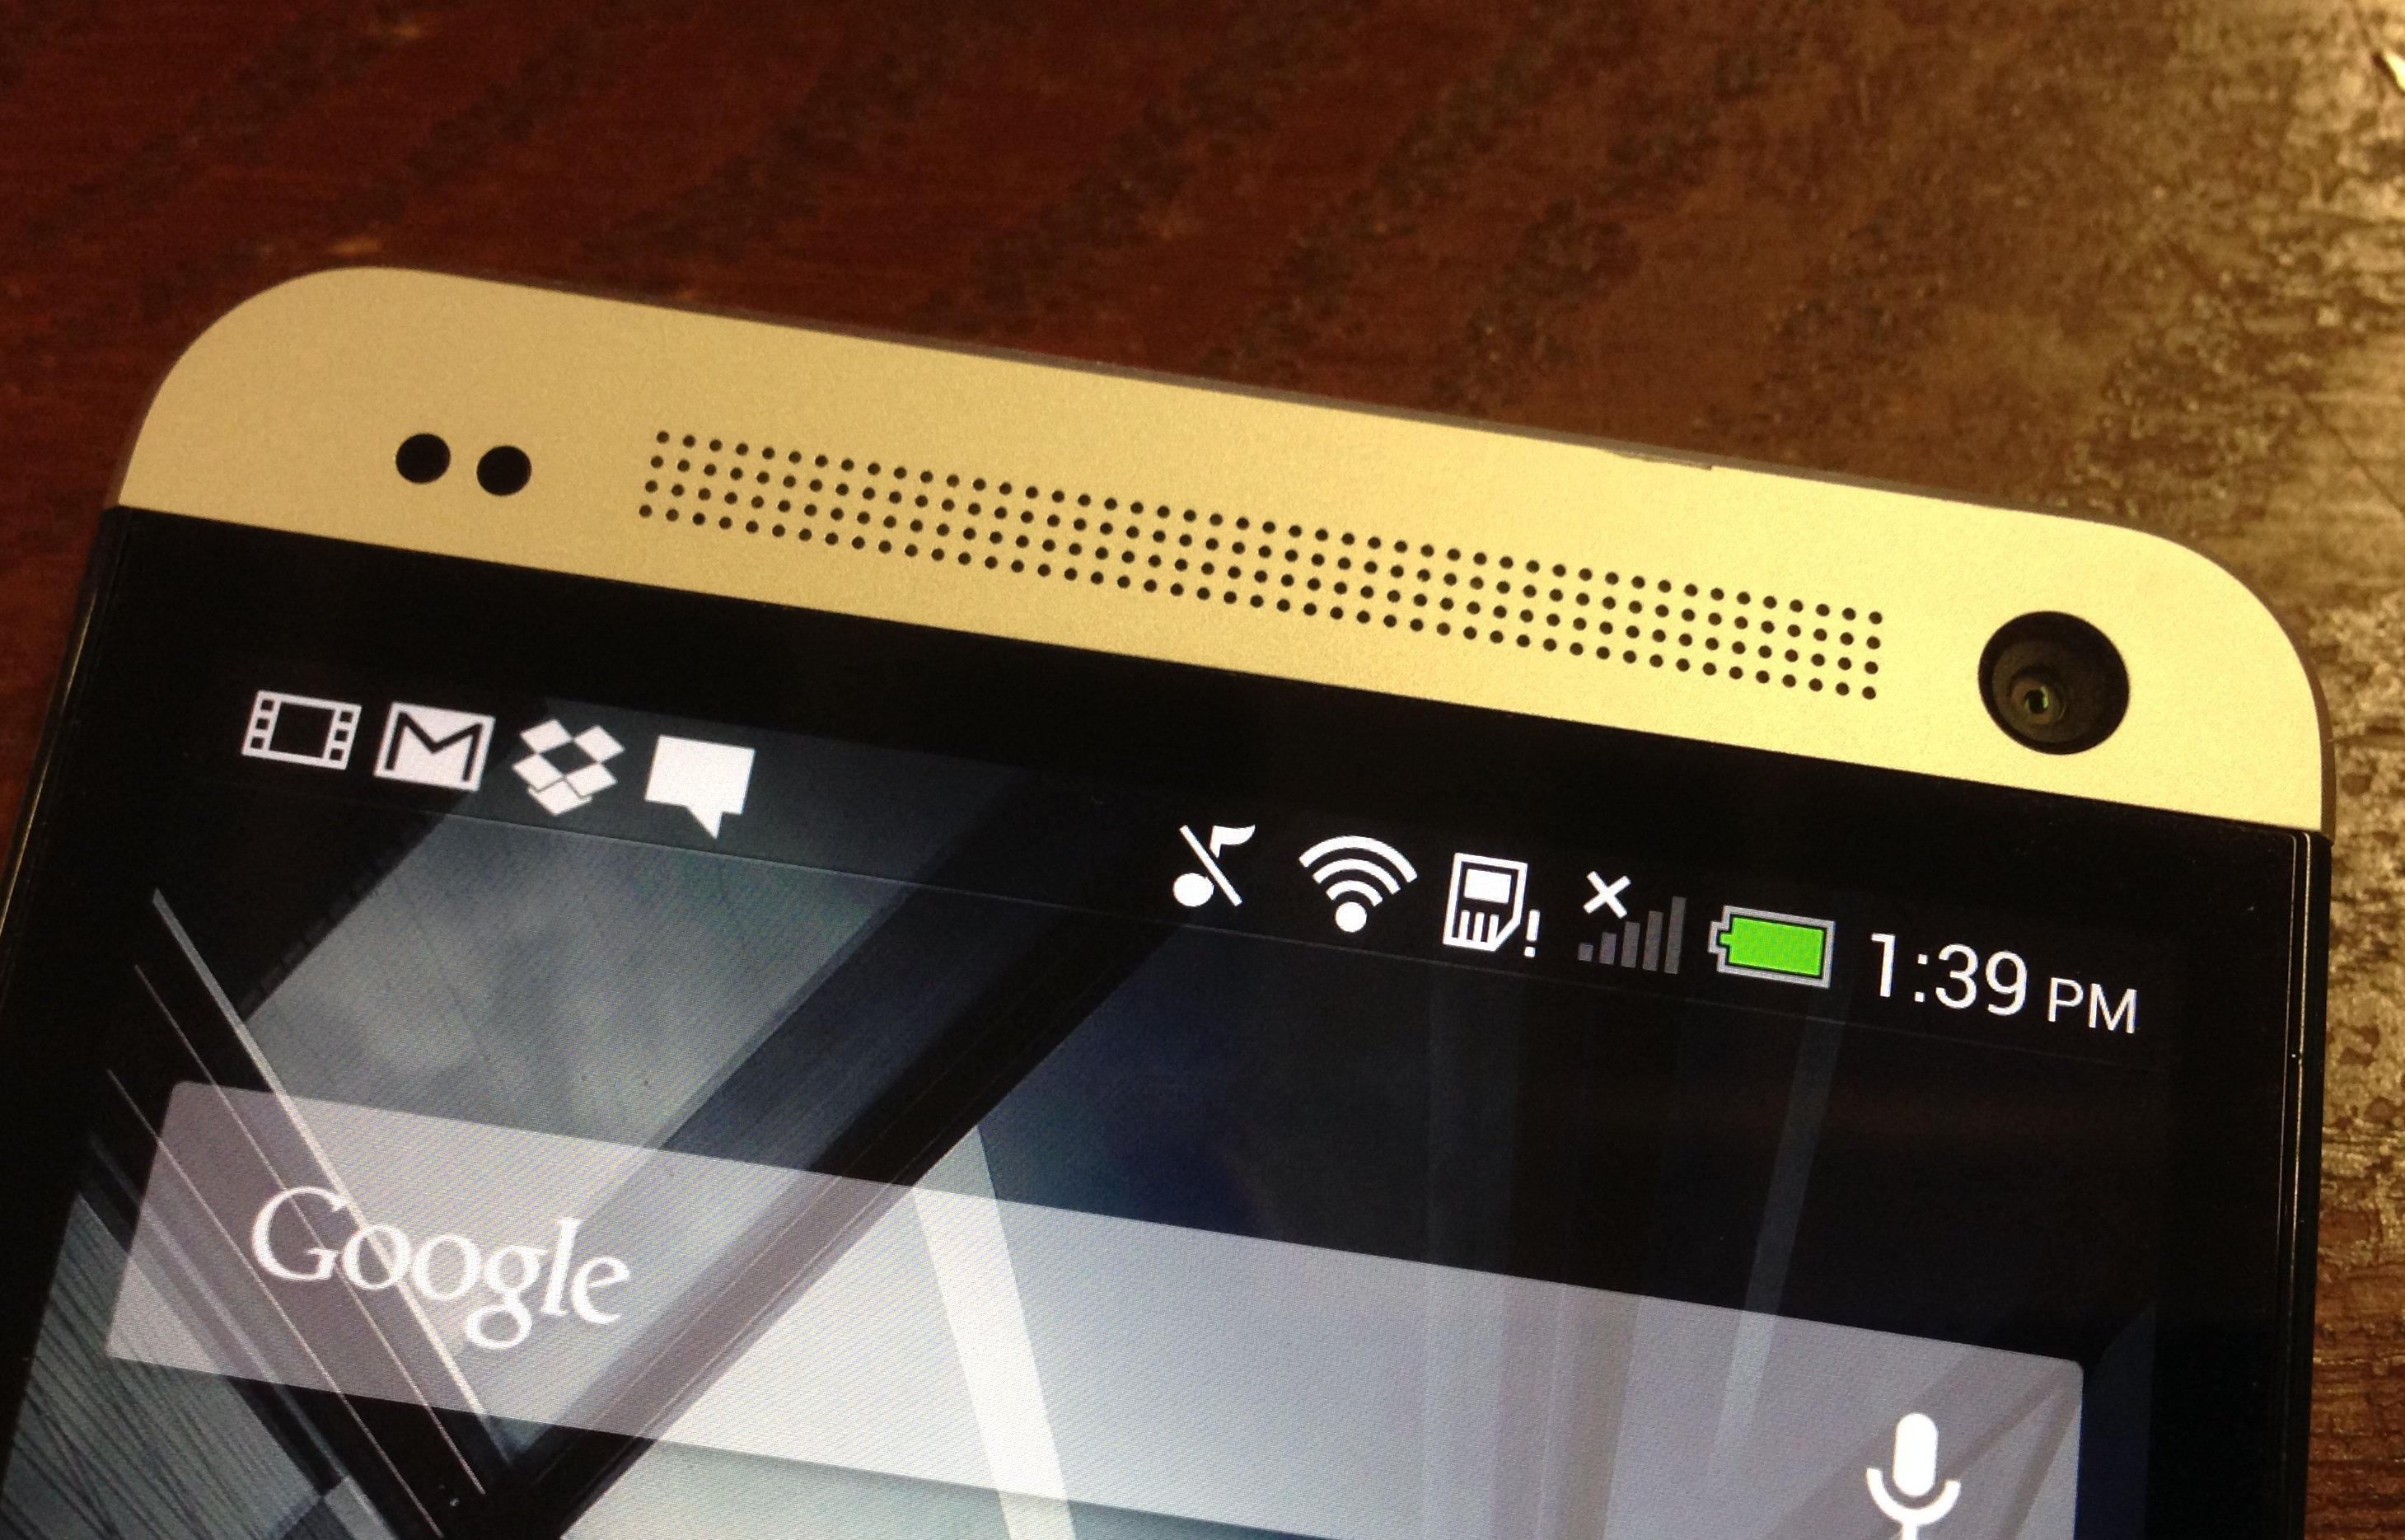 Control the HTC One notification LED.